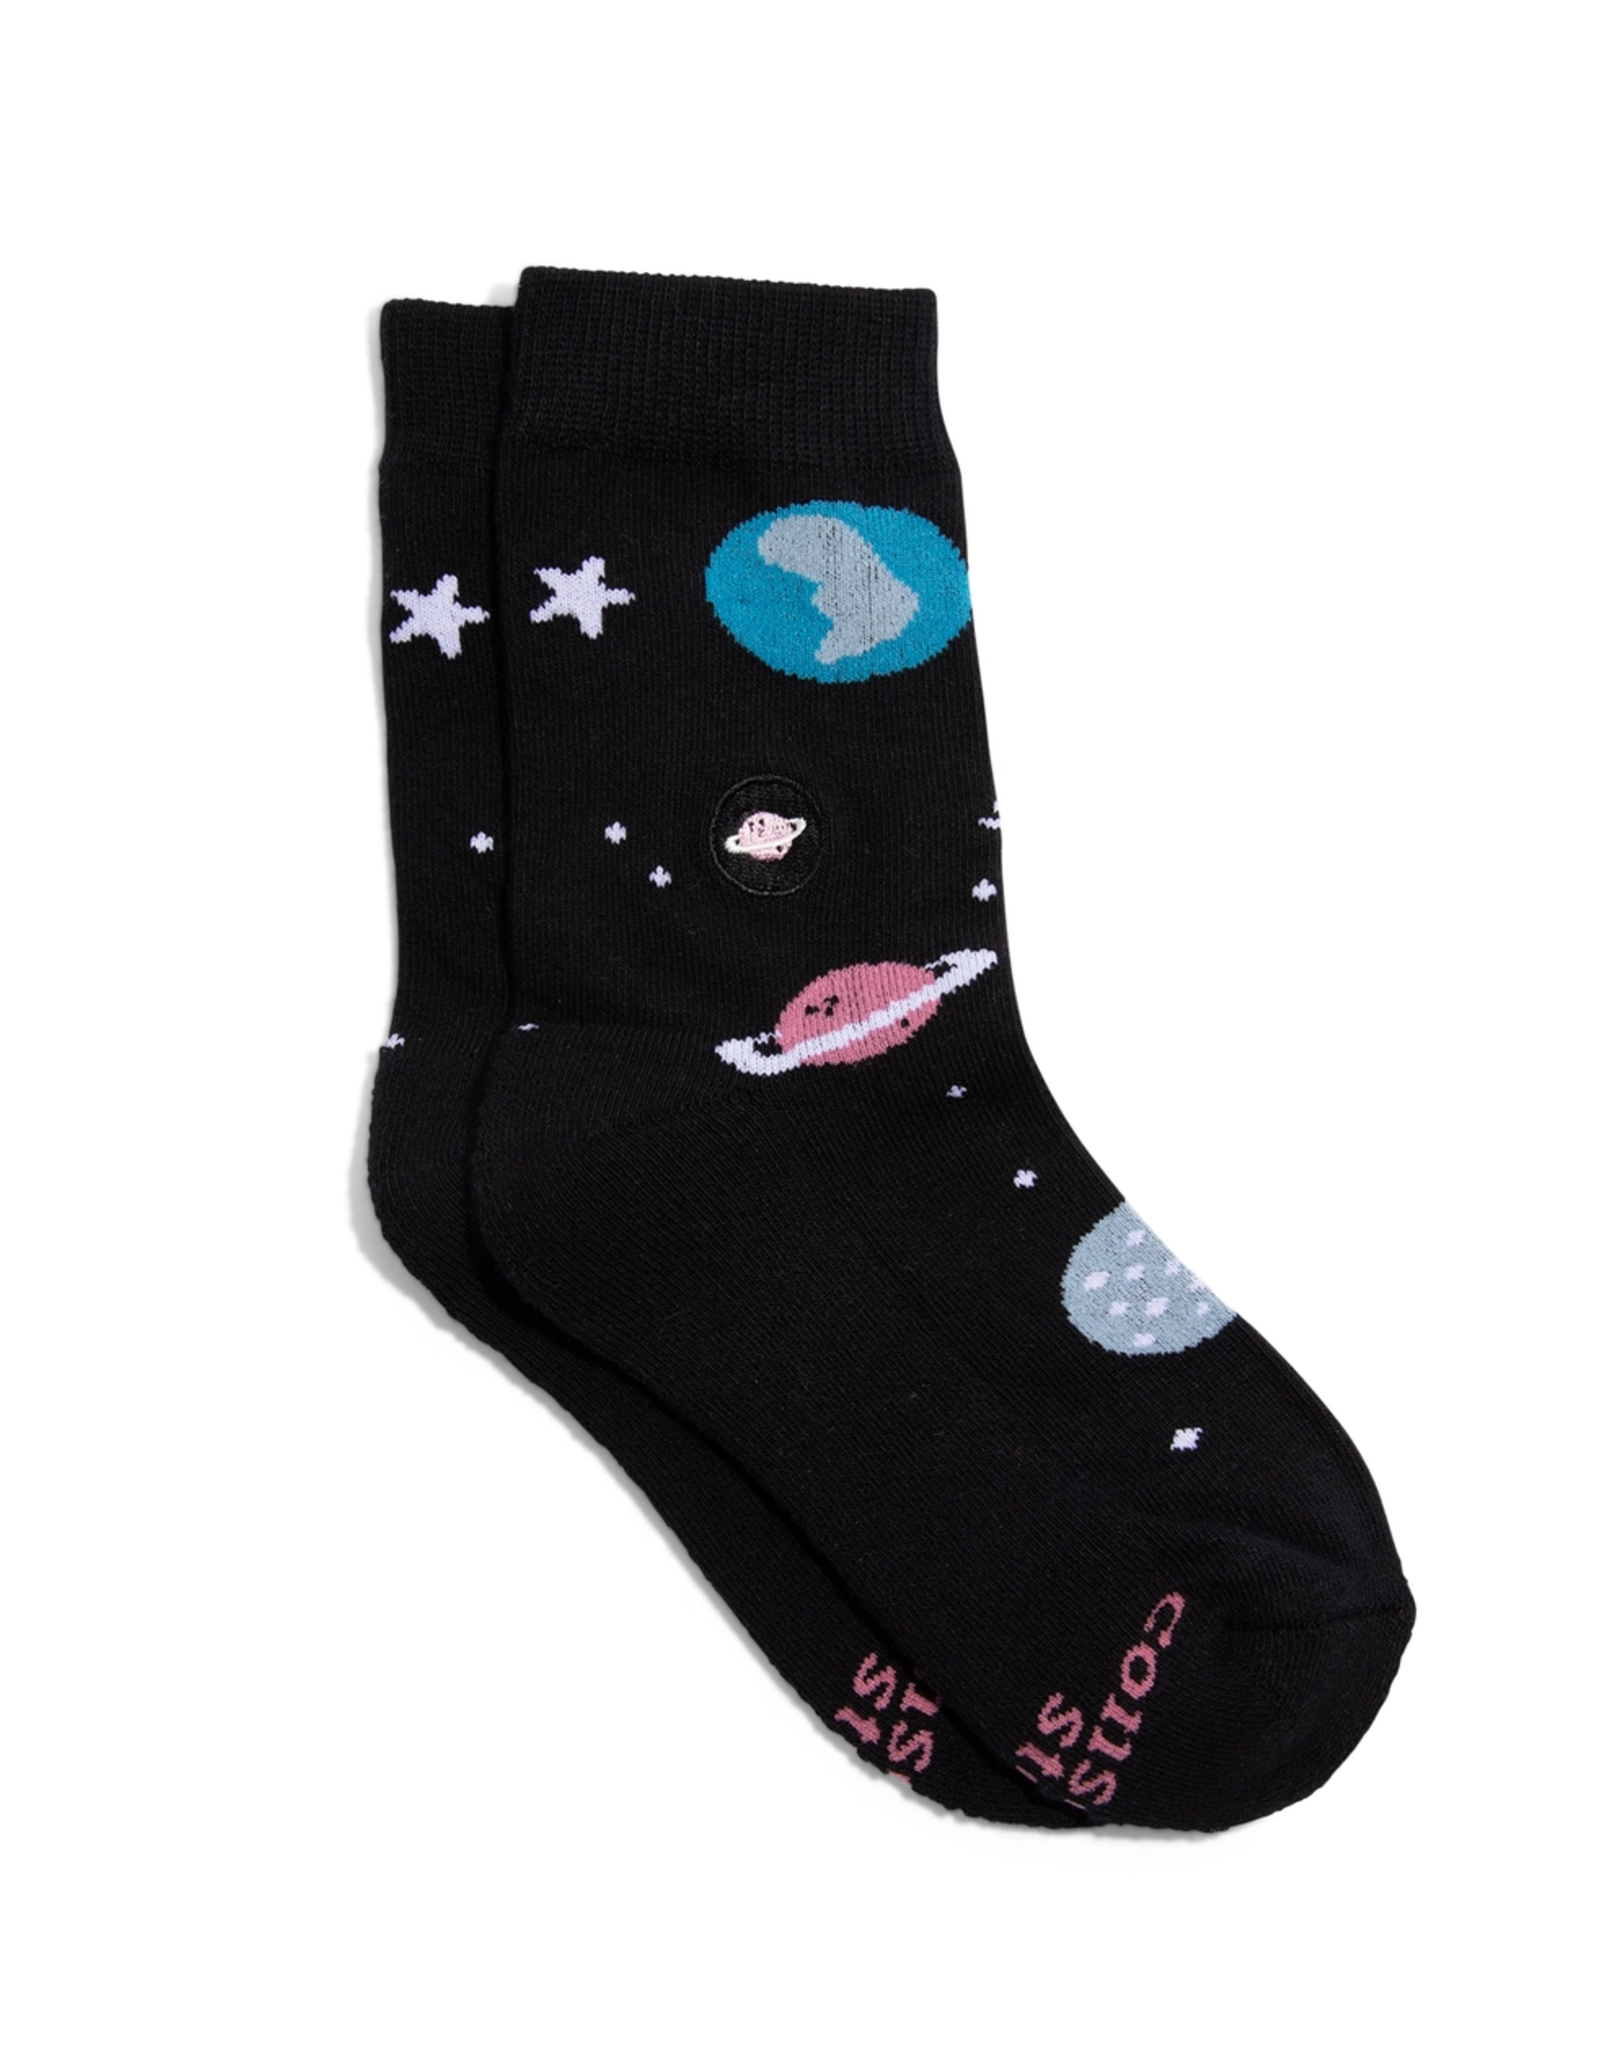 Conscious Step Children’s Socks That Support Space Exploration